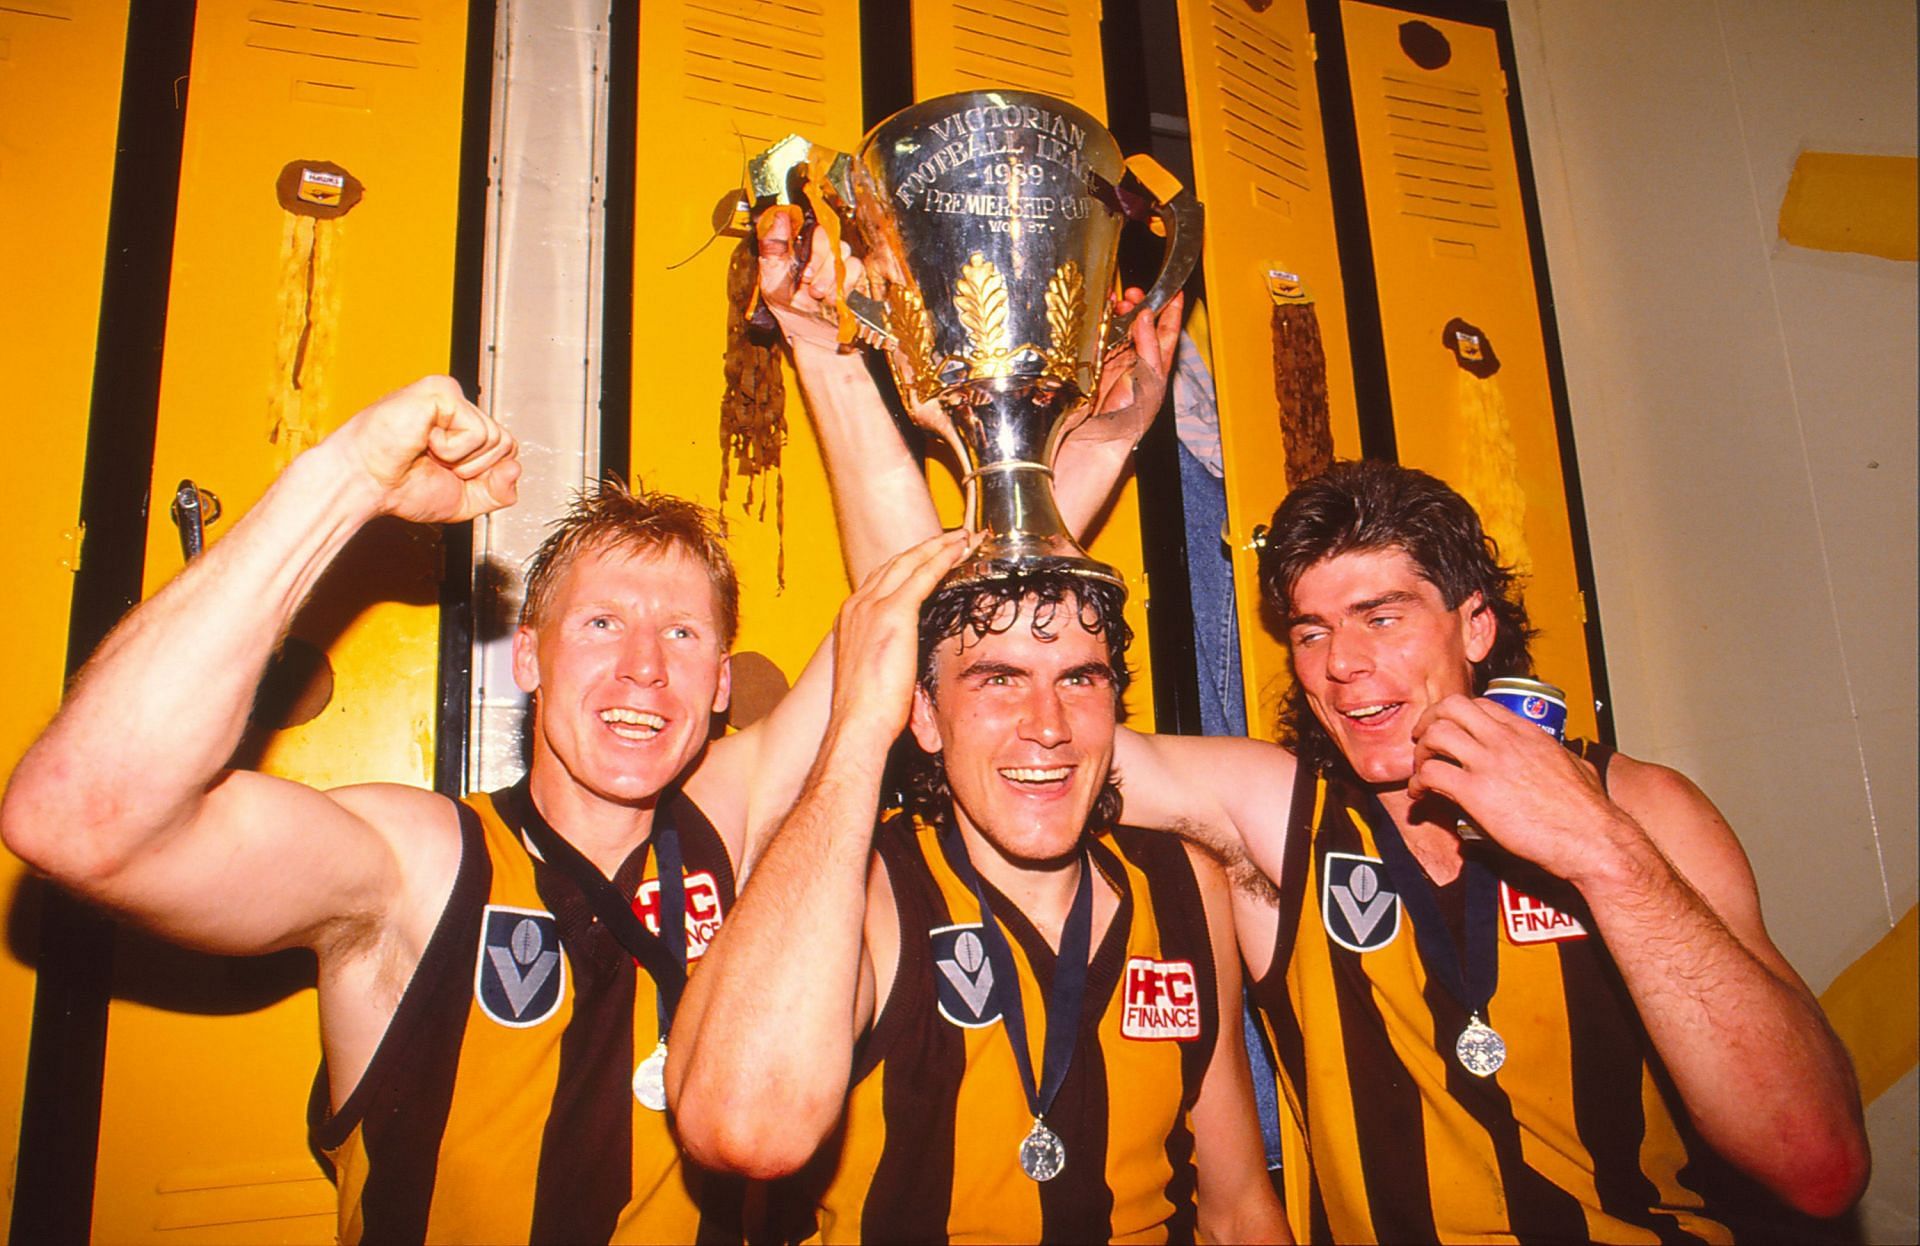 Greg Dean (C) and Gary Ayres (R) of the Hawks celebrate with the trophy following the AFL Grand Final match between Hawthorn Hawks and Geelong Cats